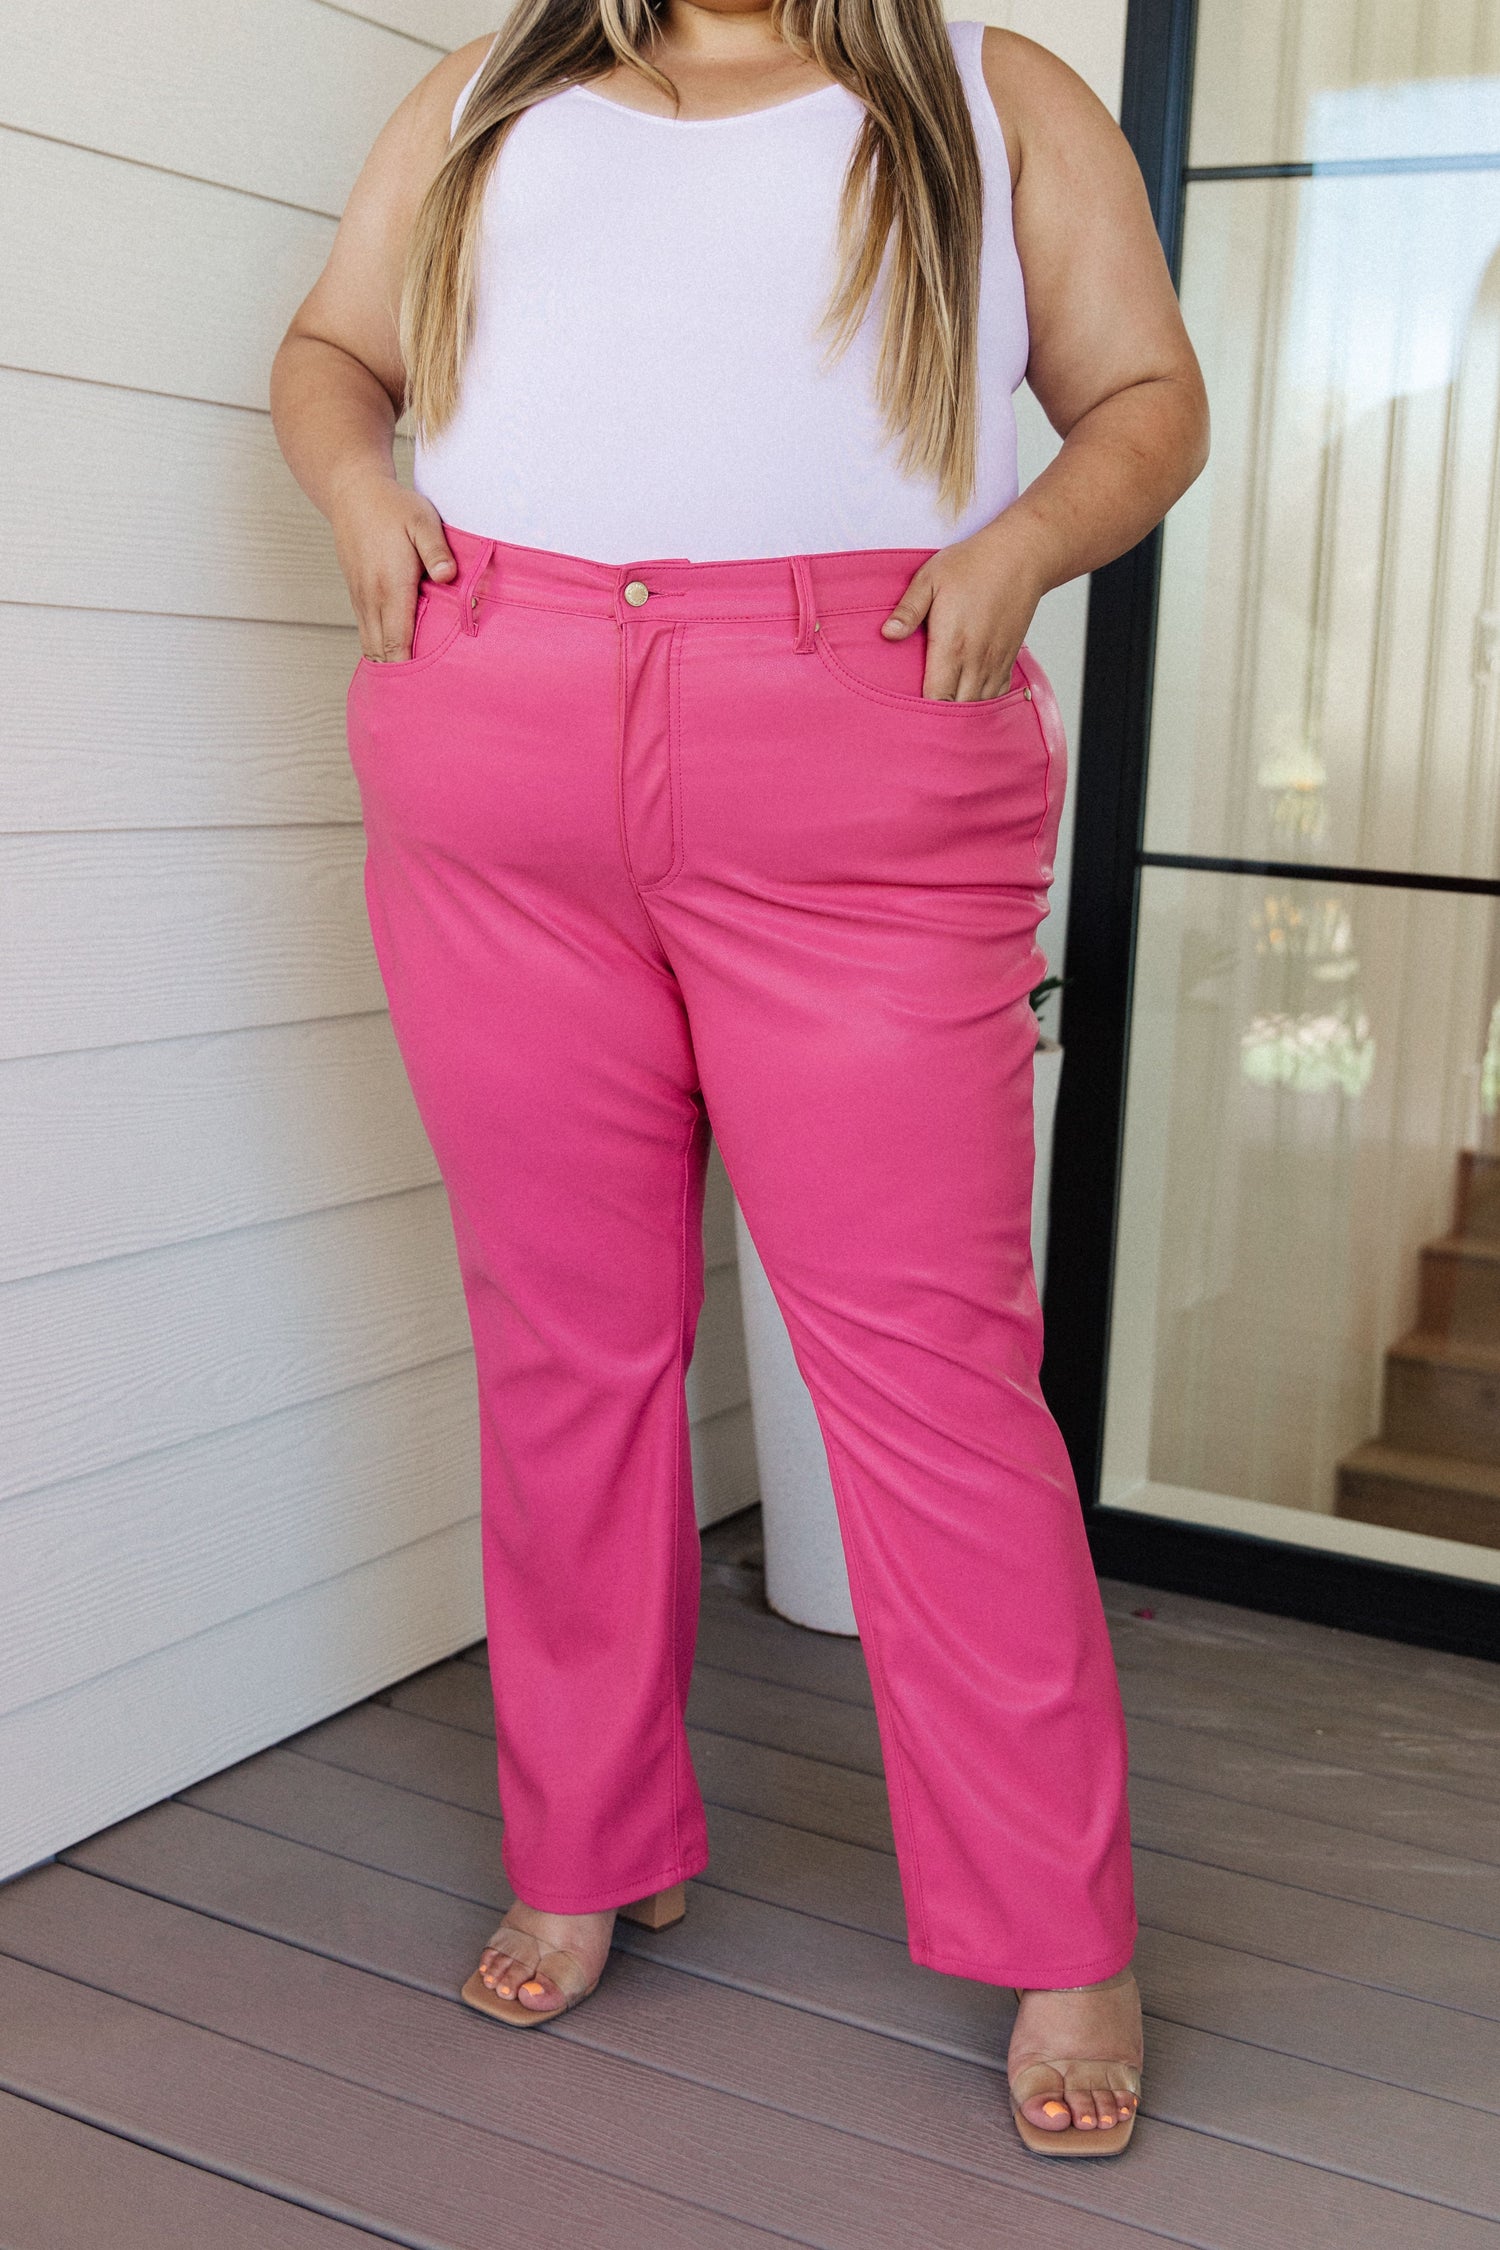 Tanya Control Top Faux Leather Pants in Hot Pink - WEBSITE EXCLUSIVE